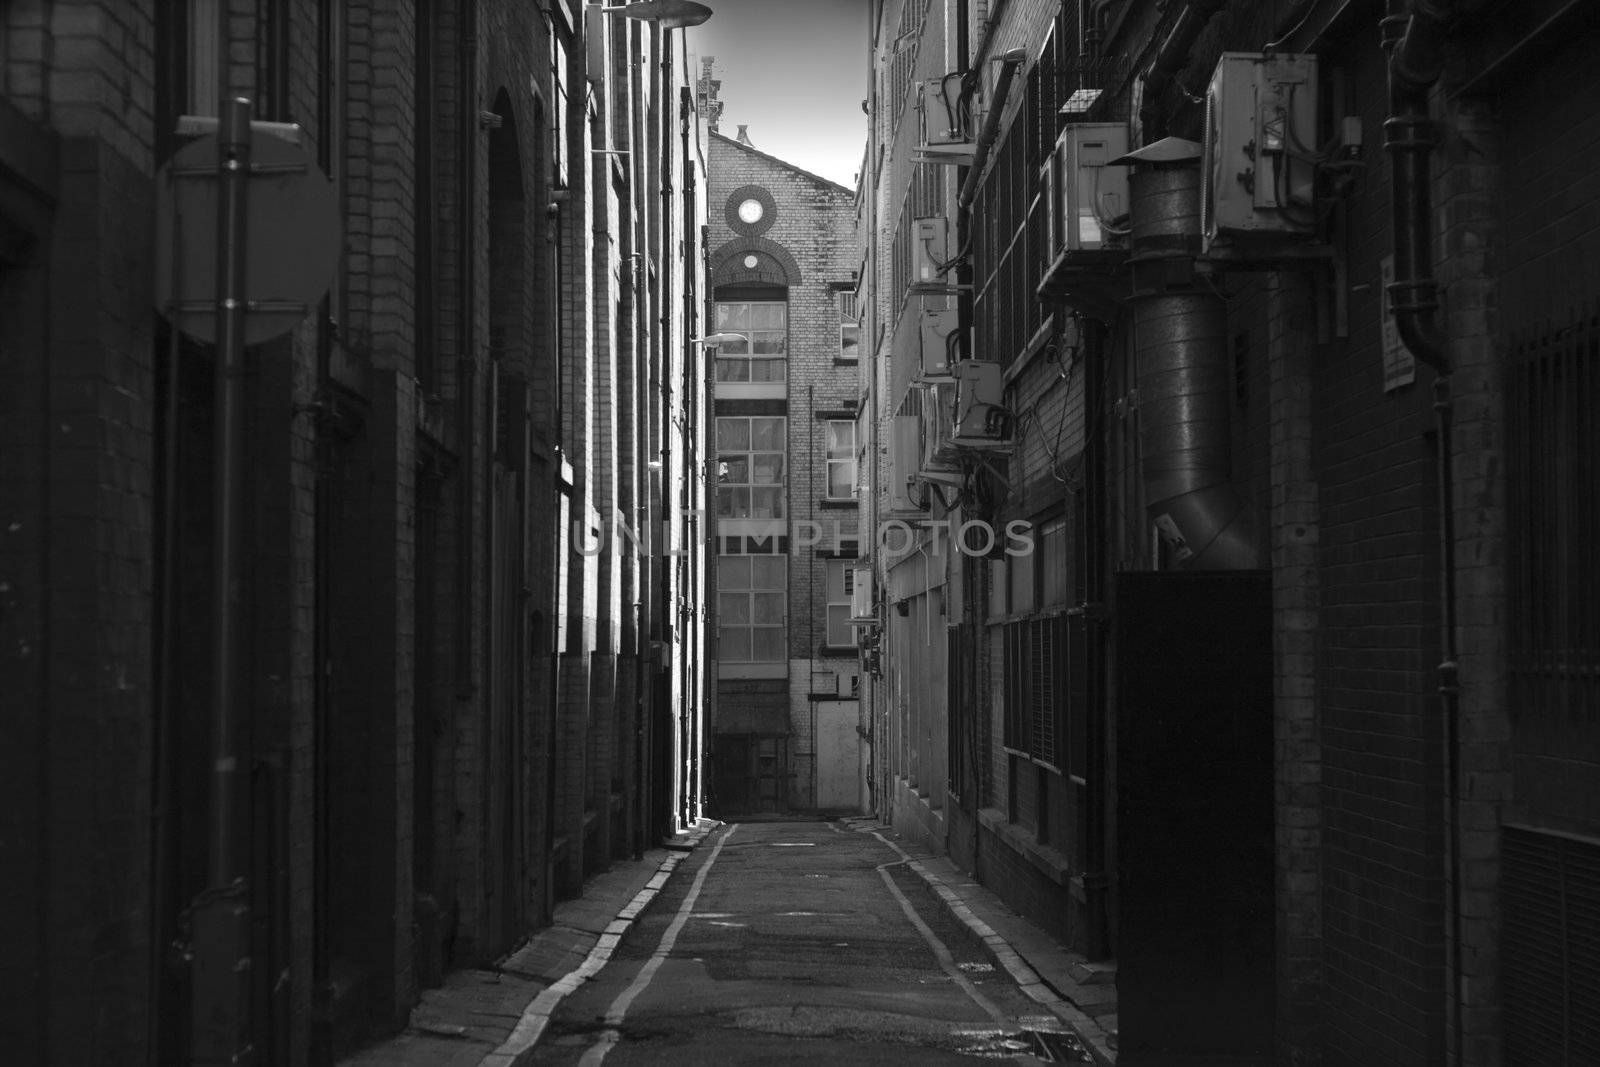 Looking down a long dark back alley